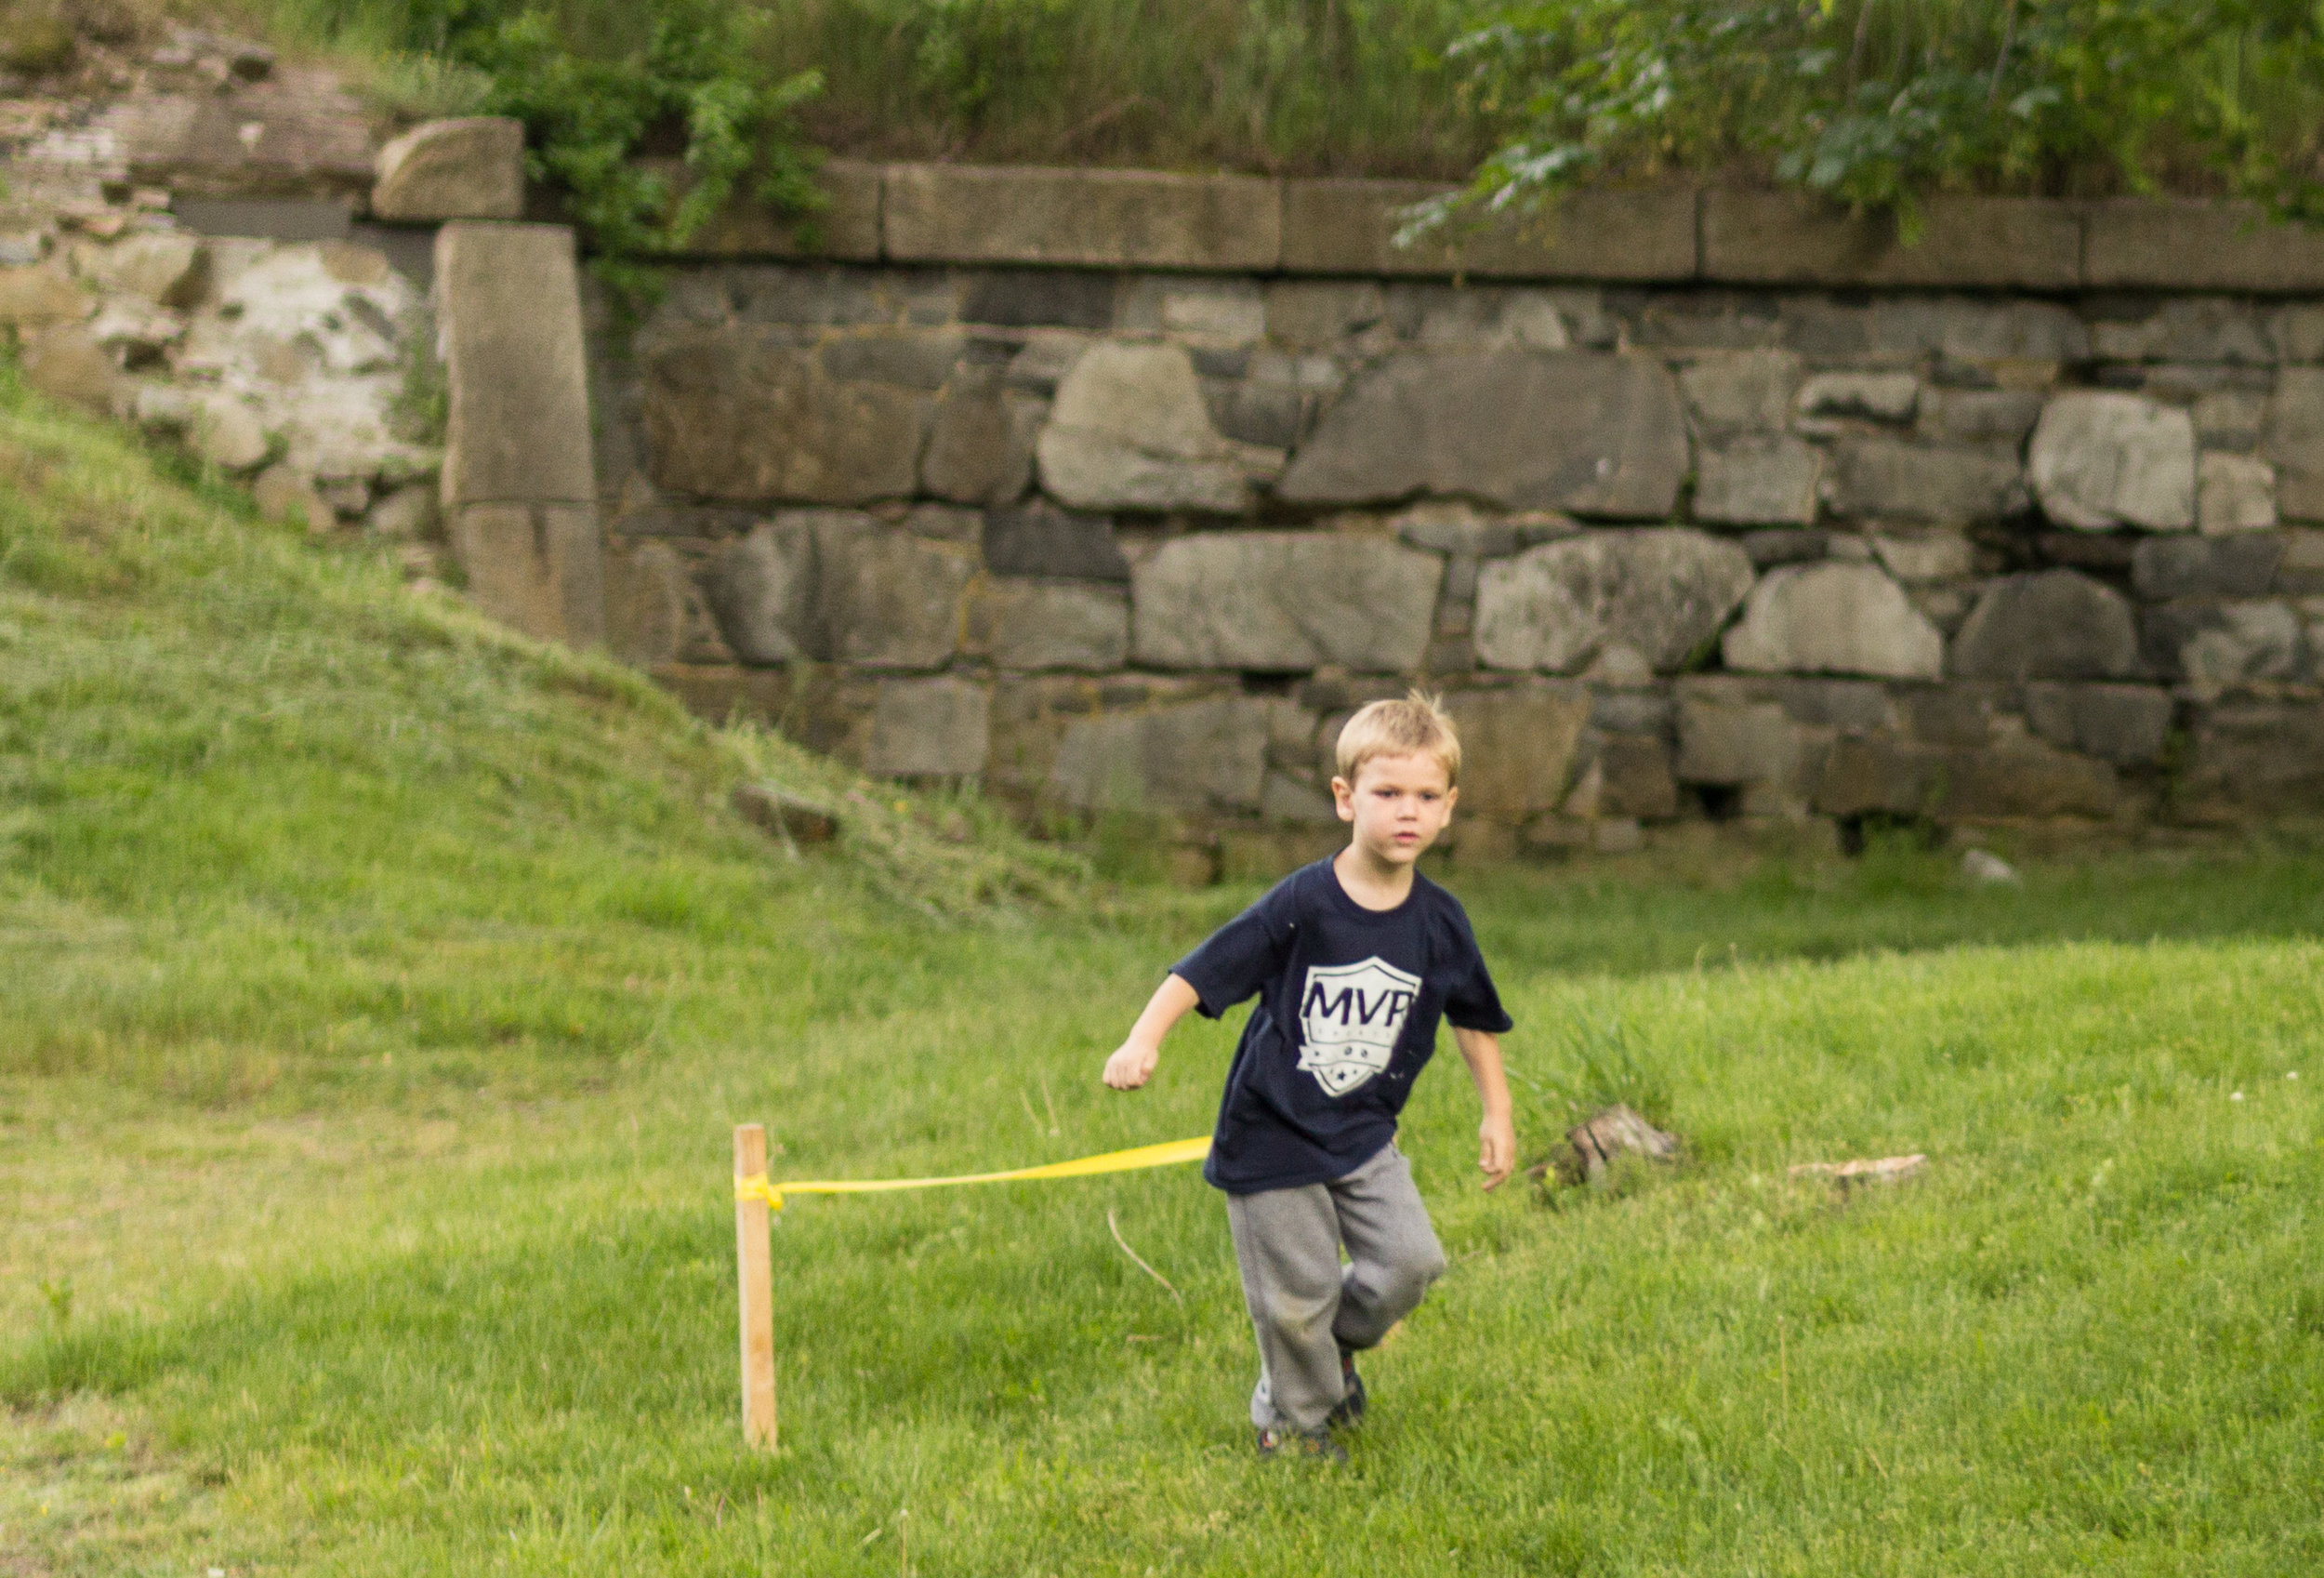 Cub Scouts Obstacle Course_25.jpg